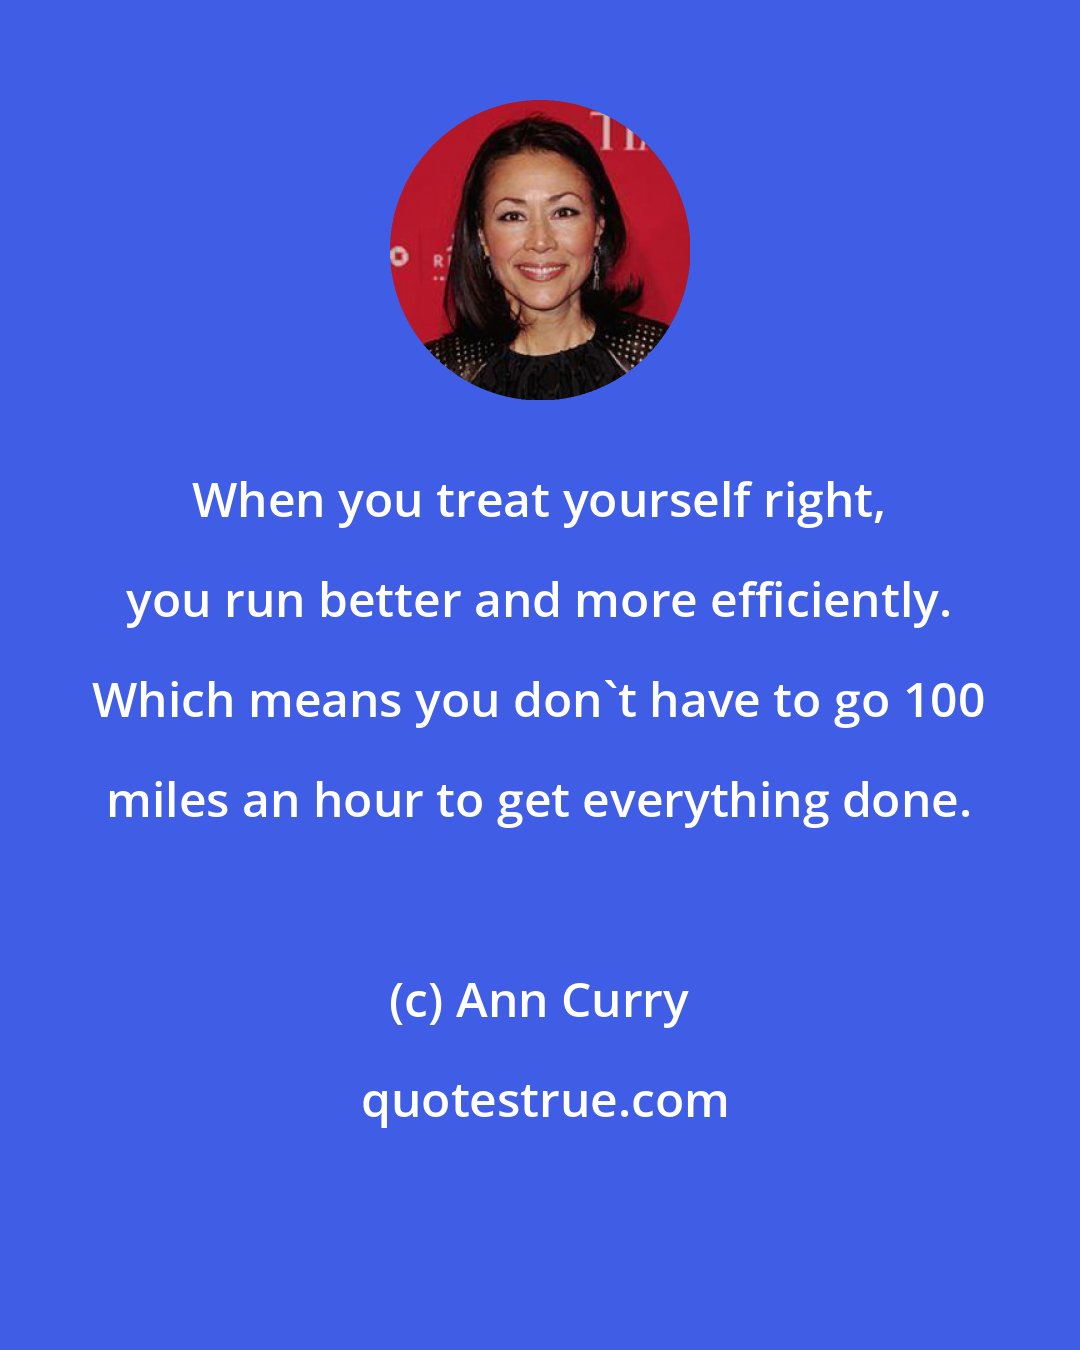 Ann Curry: When you treat yourself right, you run better and more efficiently. Which means you don't have to go 100 miles an hour to get everything done.